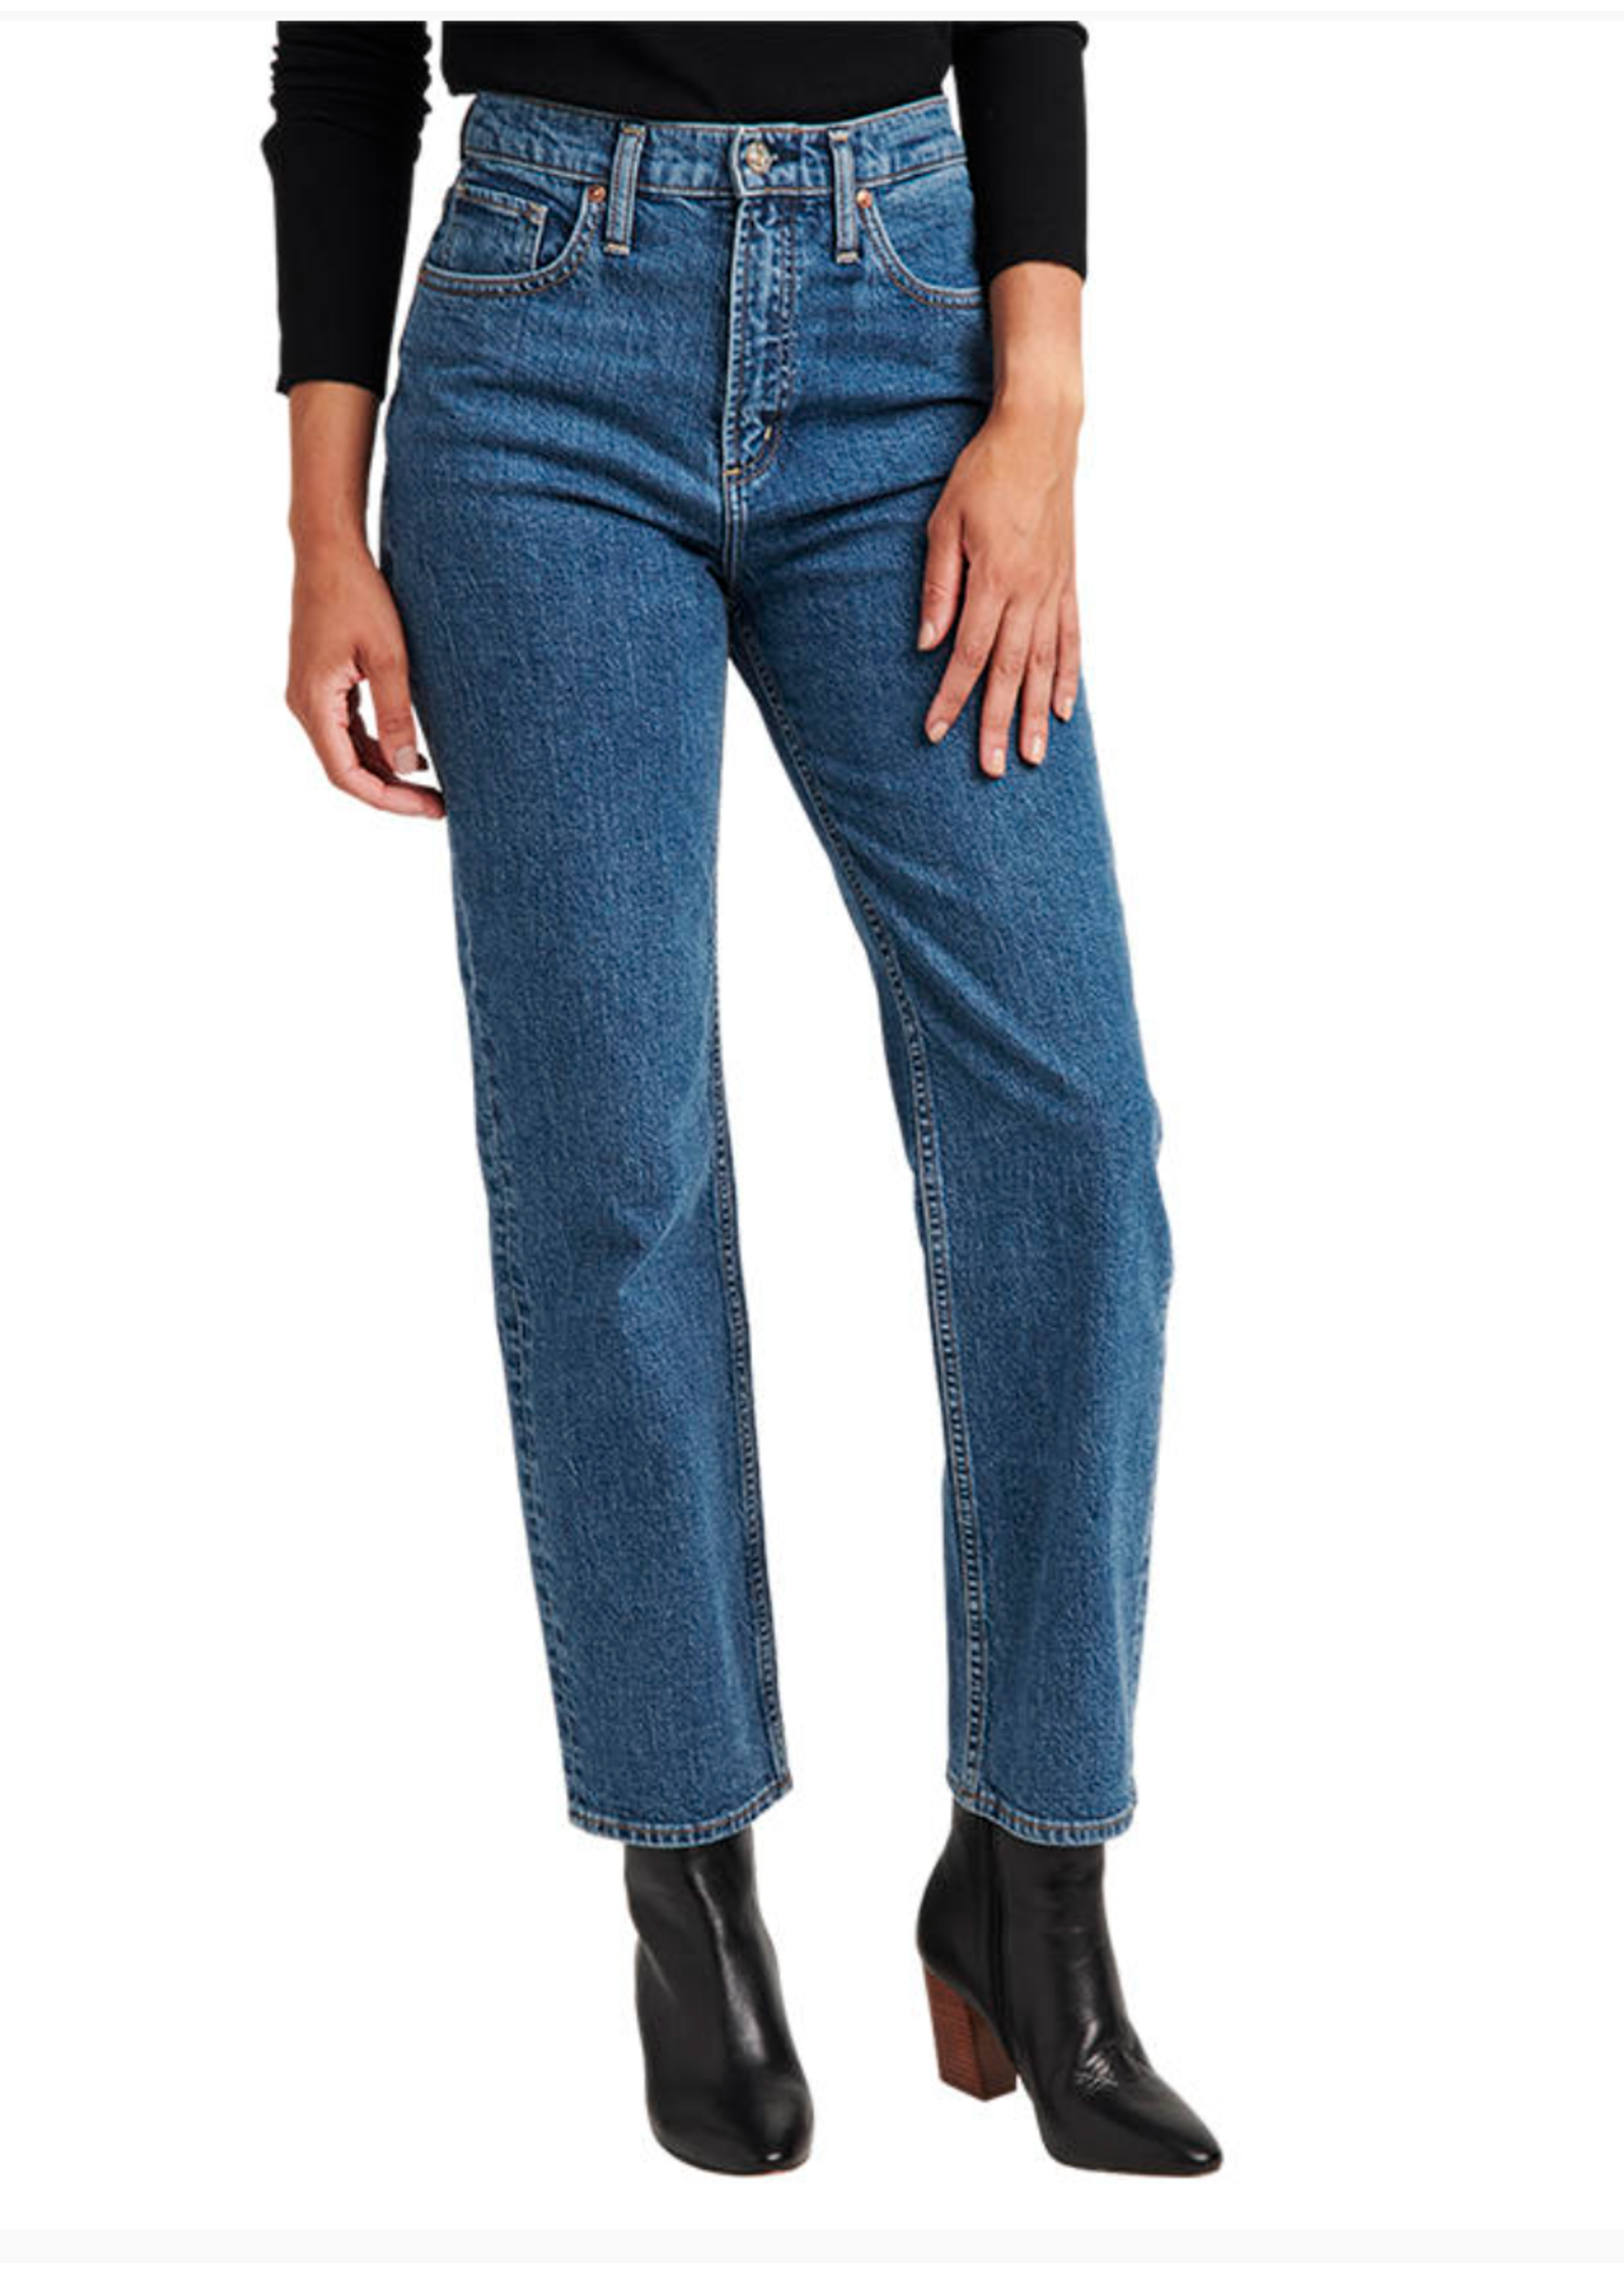 Silver Jeans Co. Highly Desirable Straight Leg